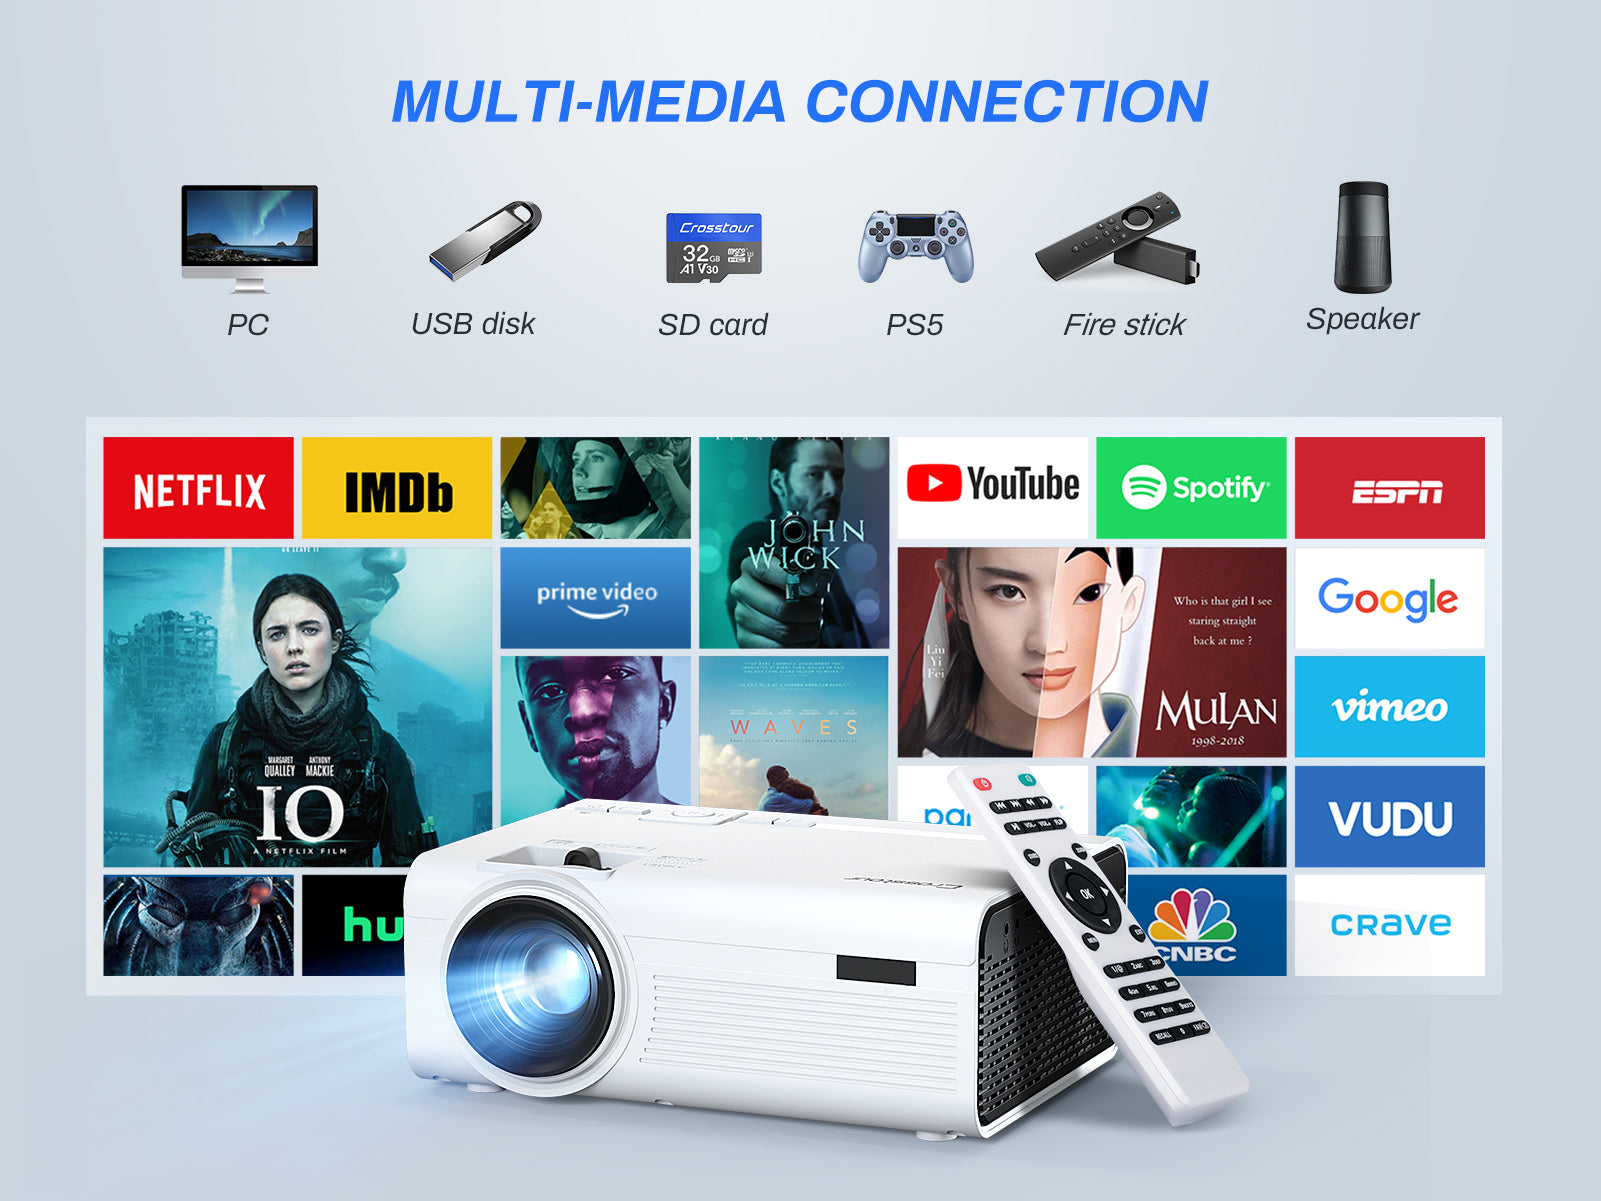 Crosstour WiFi Mini Portable Projector, HD 720P Supported Portable Video  Outdoor Movie Projector with 200'' Large Screen 